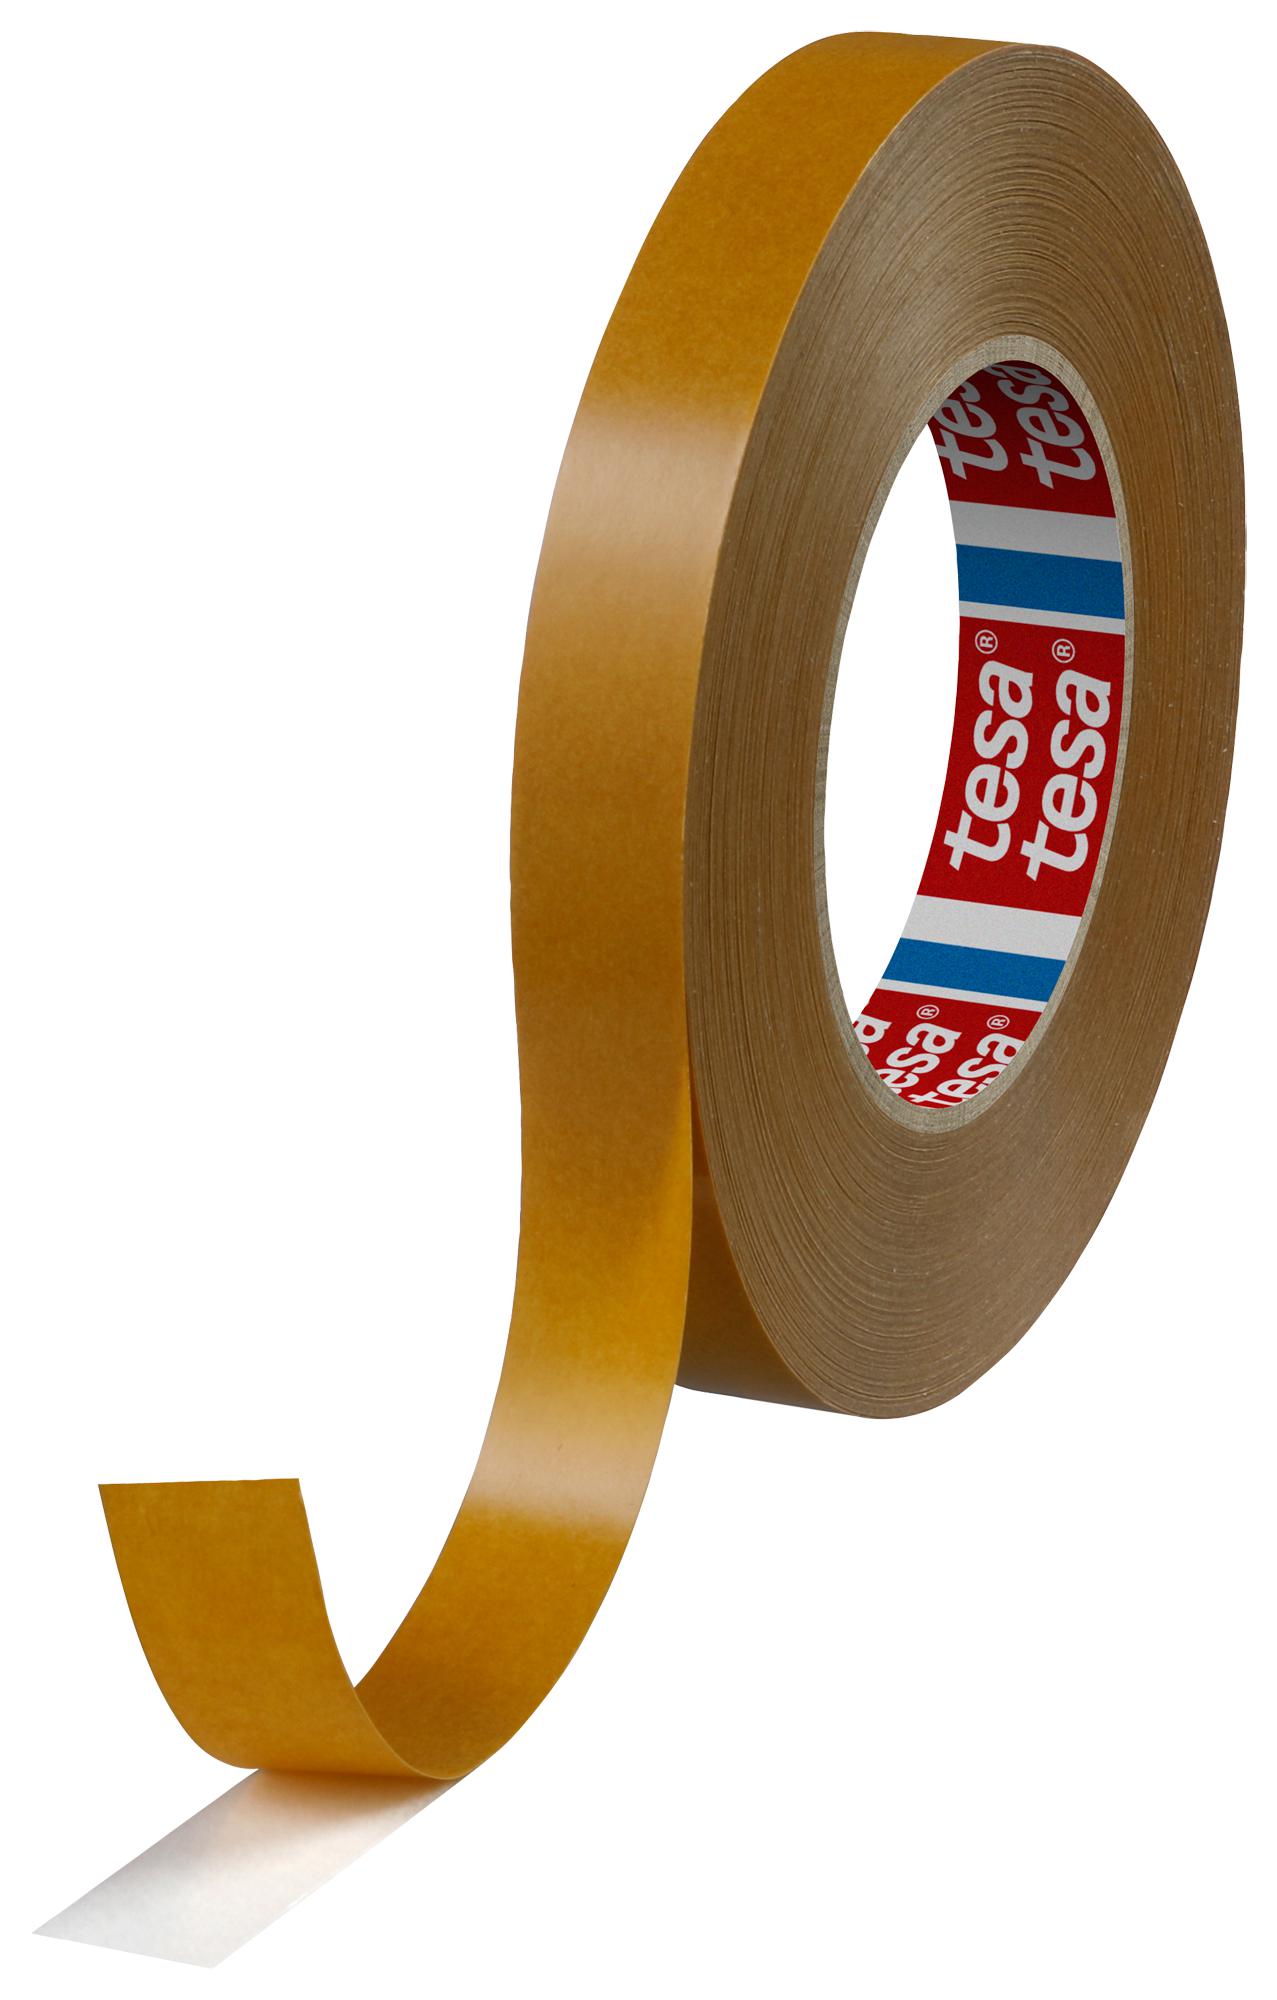 Tesa 51571-00000-00 Double Sided Tape, 50M X 19mm